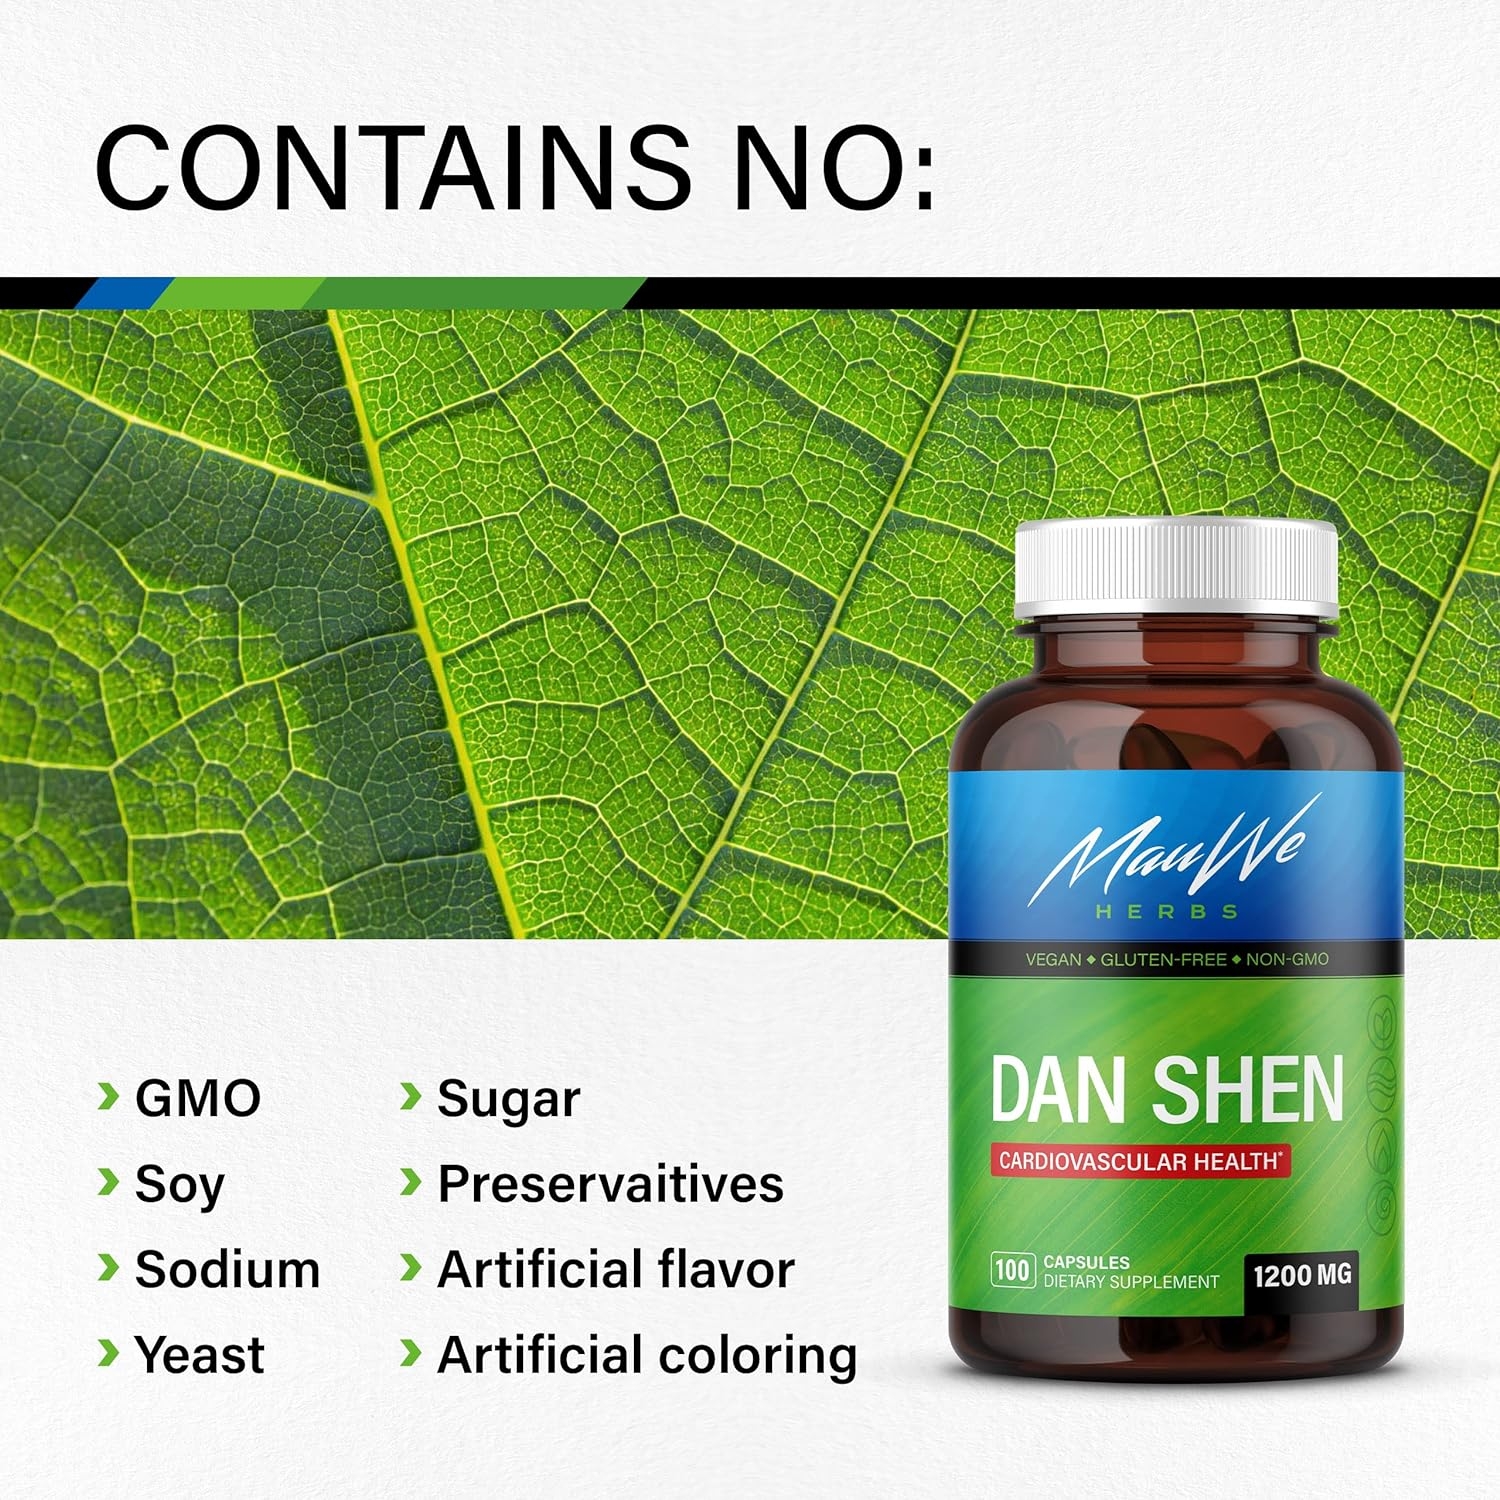 Dan Shen Herb Red Sage Supplement - Salvia Miltiorrhiza or Dan Shen Root Extract for Heart, Brain, Bone, Oral Health - Organic Chinese Herbs Rich in Antioxidants - 100 Red Sage Capsules